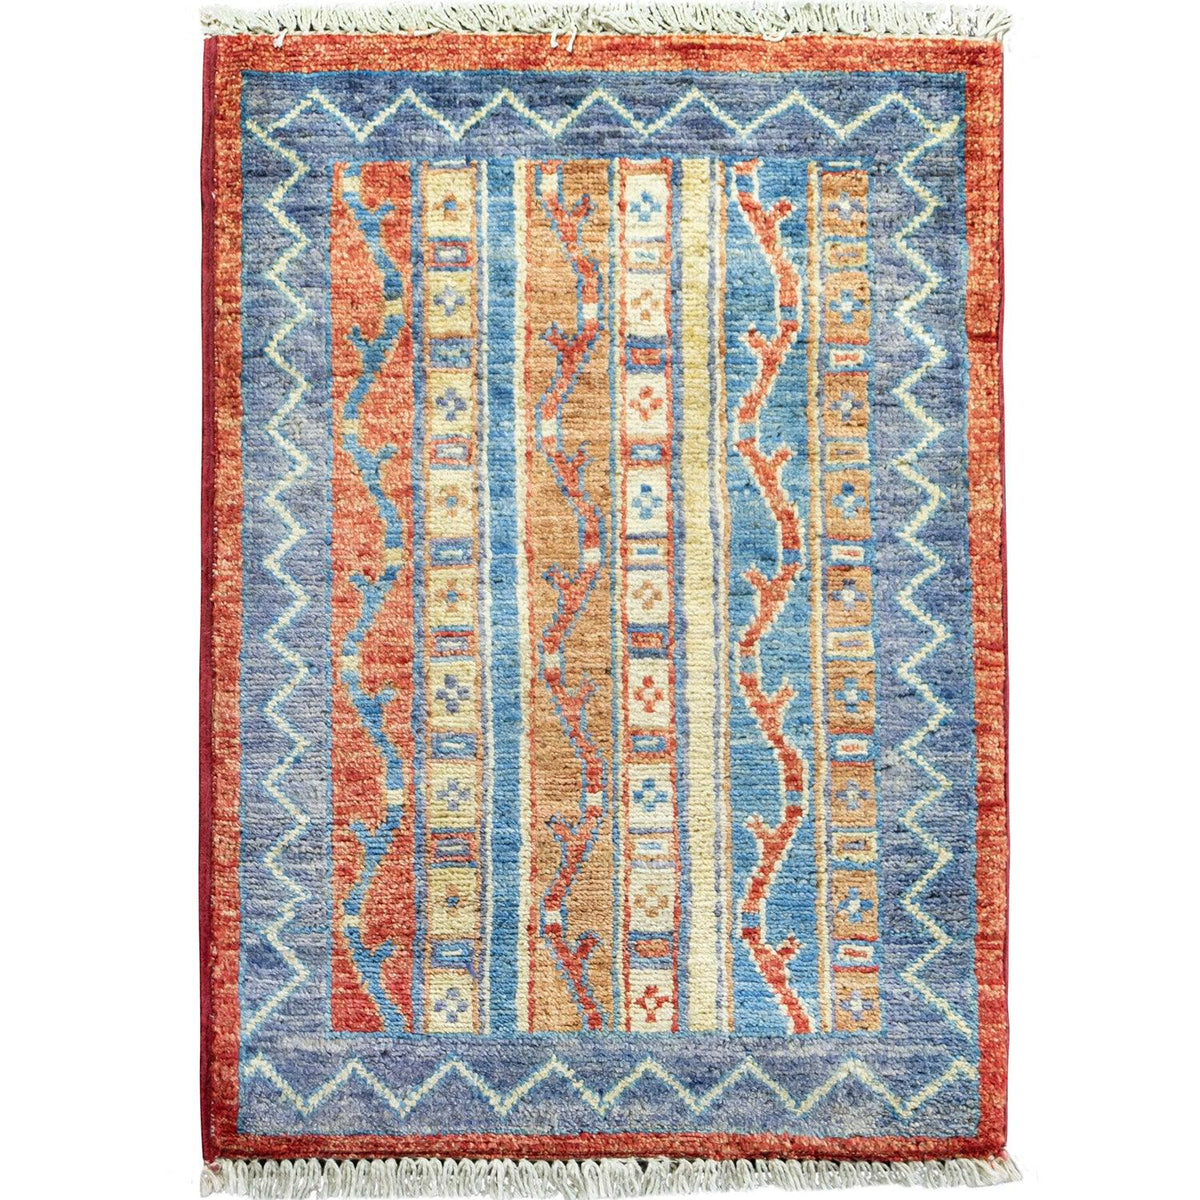 Hand-knotted Wool Extra Small Rug 45cm x 60cm